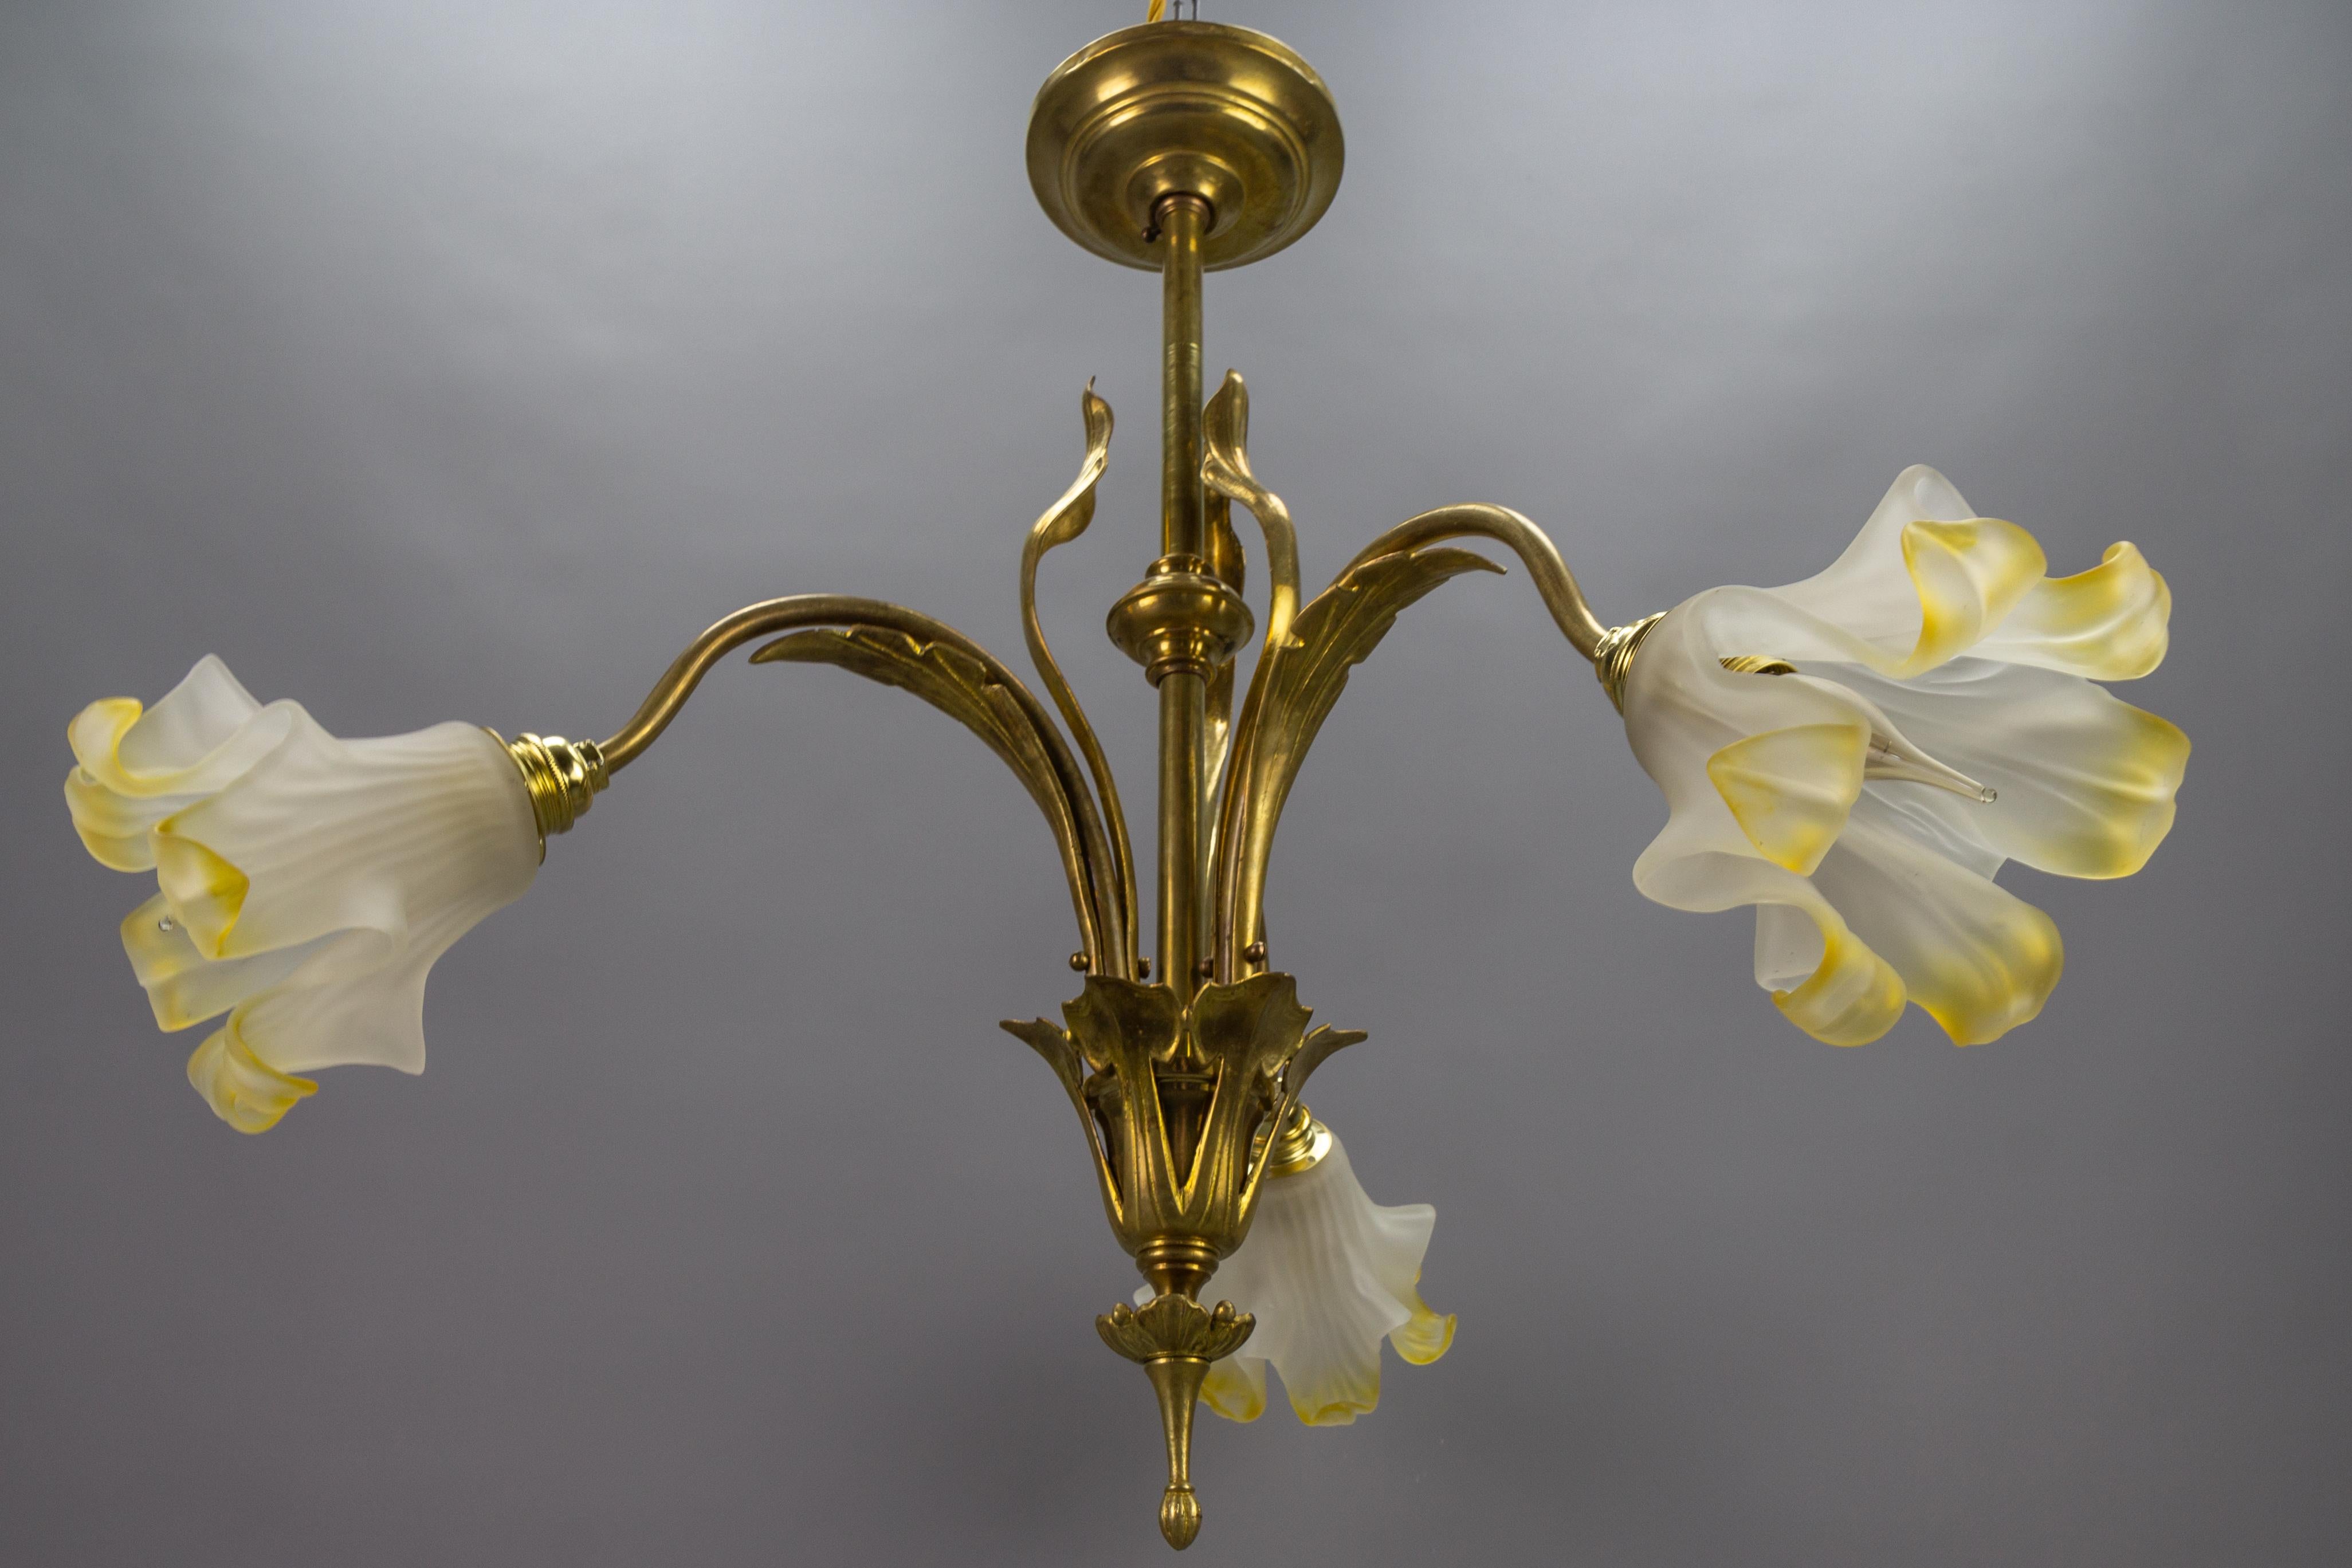 French Art Nouveau Brass and Glass Three-Light Iris-Shaped Chandelier, ca. 1910 For Sale 7